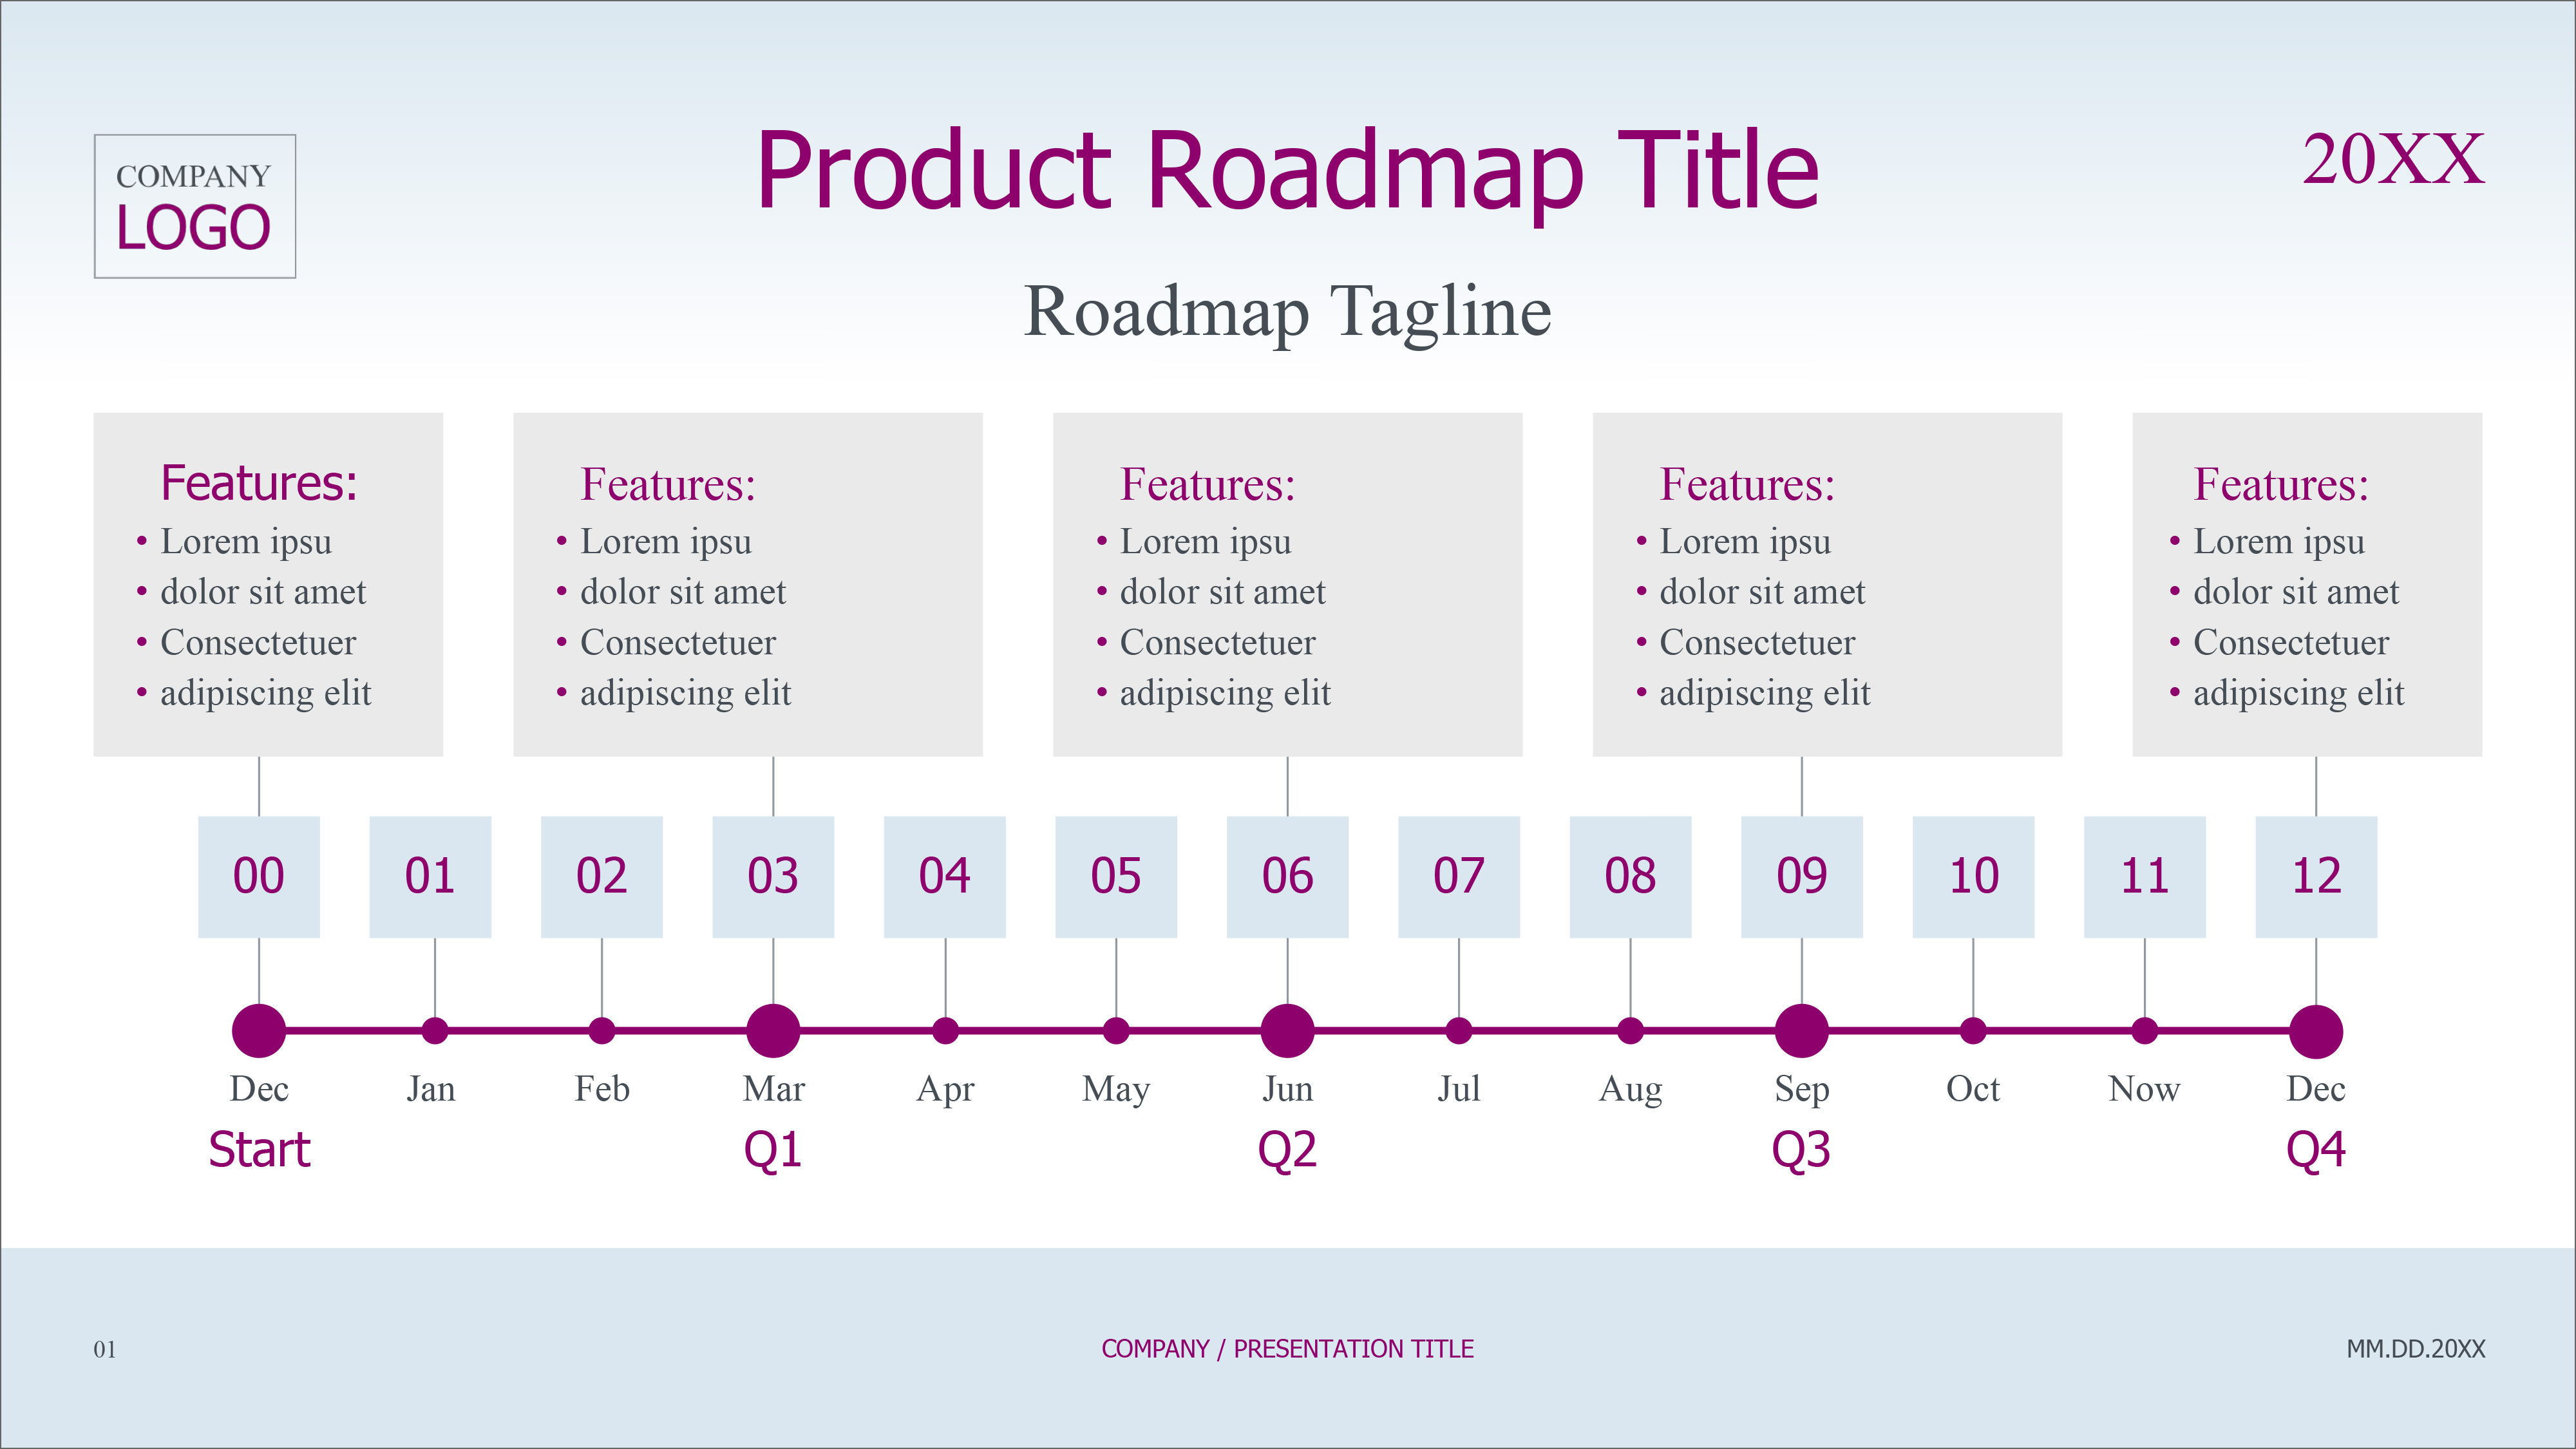 23-free-gantt-chart-and-project-timeline-templates-in-powerpoints-excel-sheets